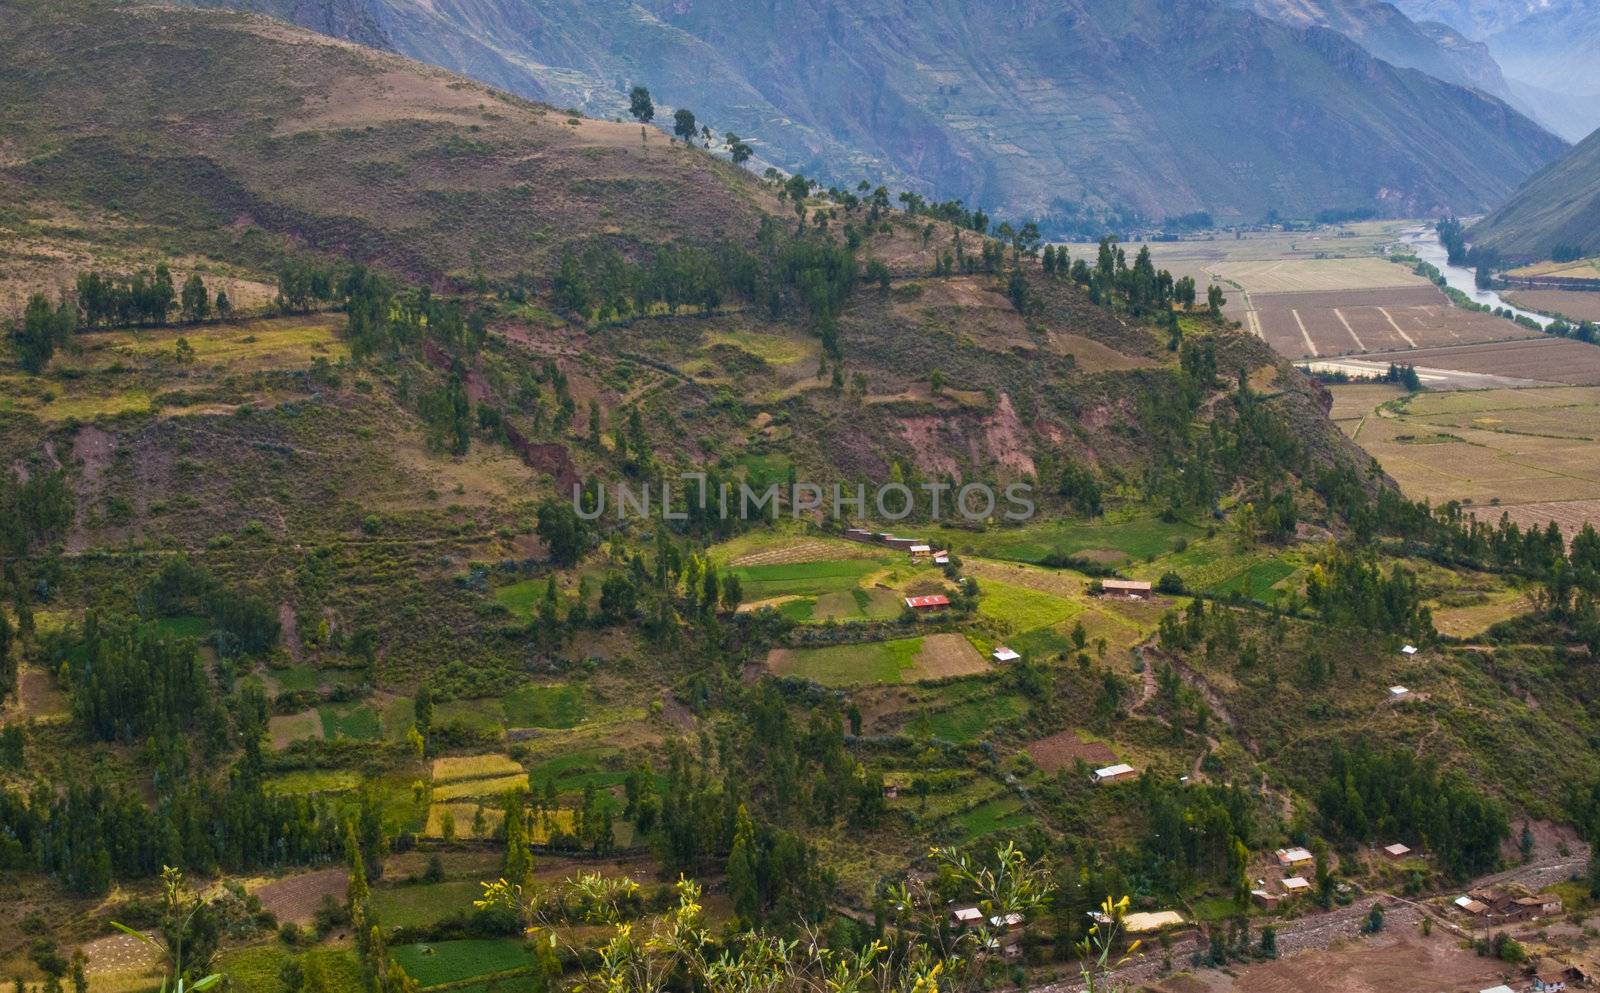 The Sacred valley by kobby_dagan